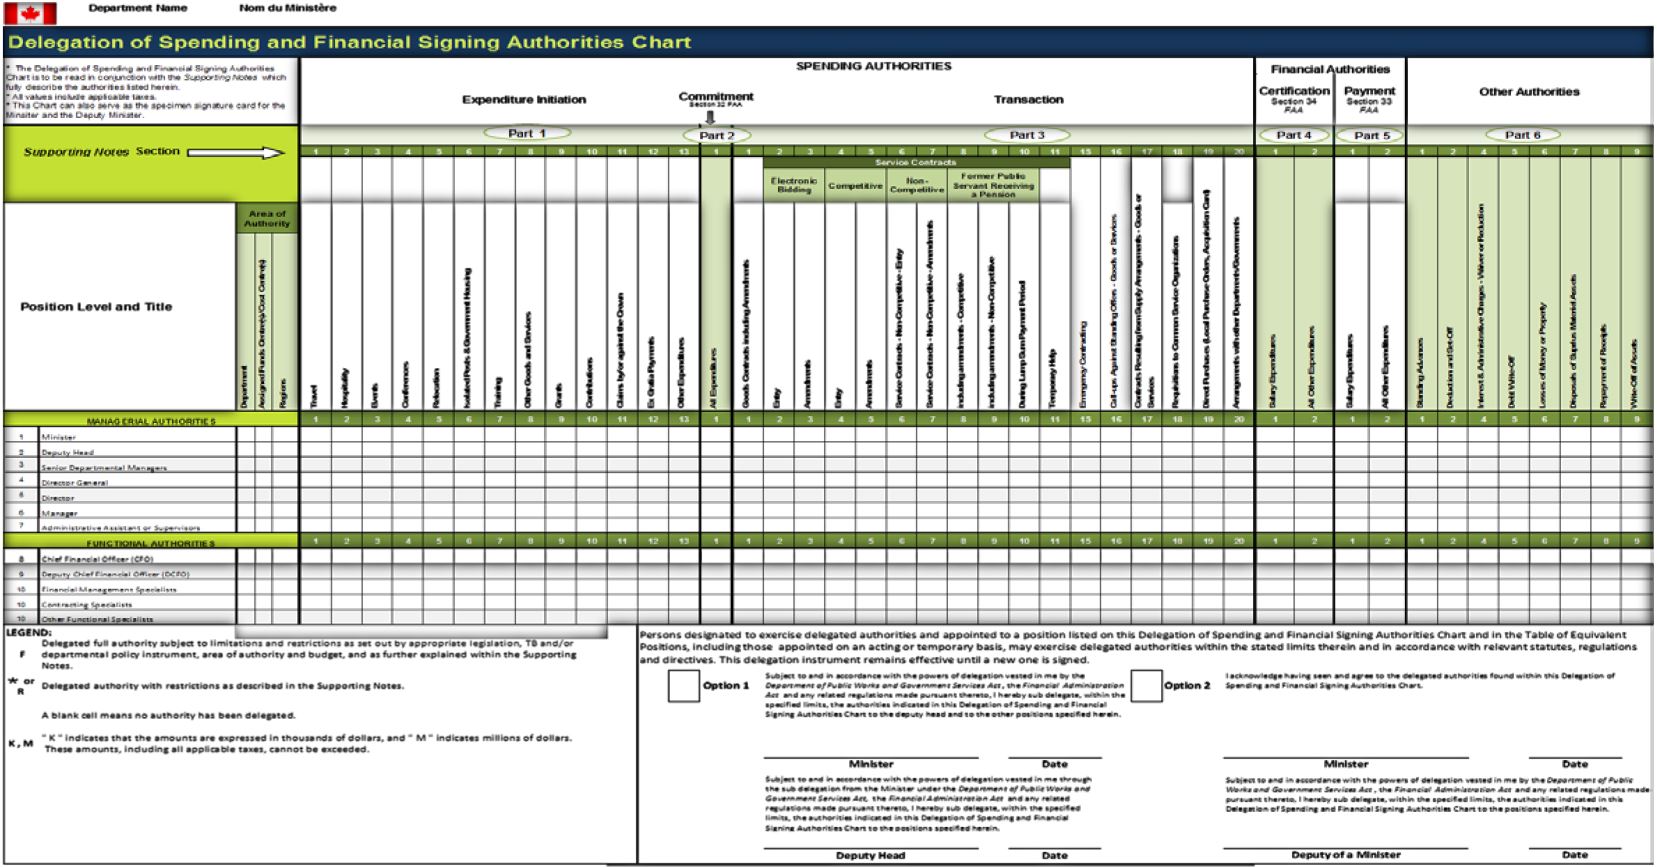 example of a delegation chart. Text version below: